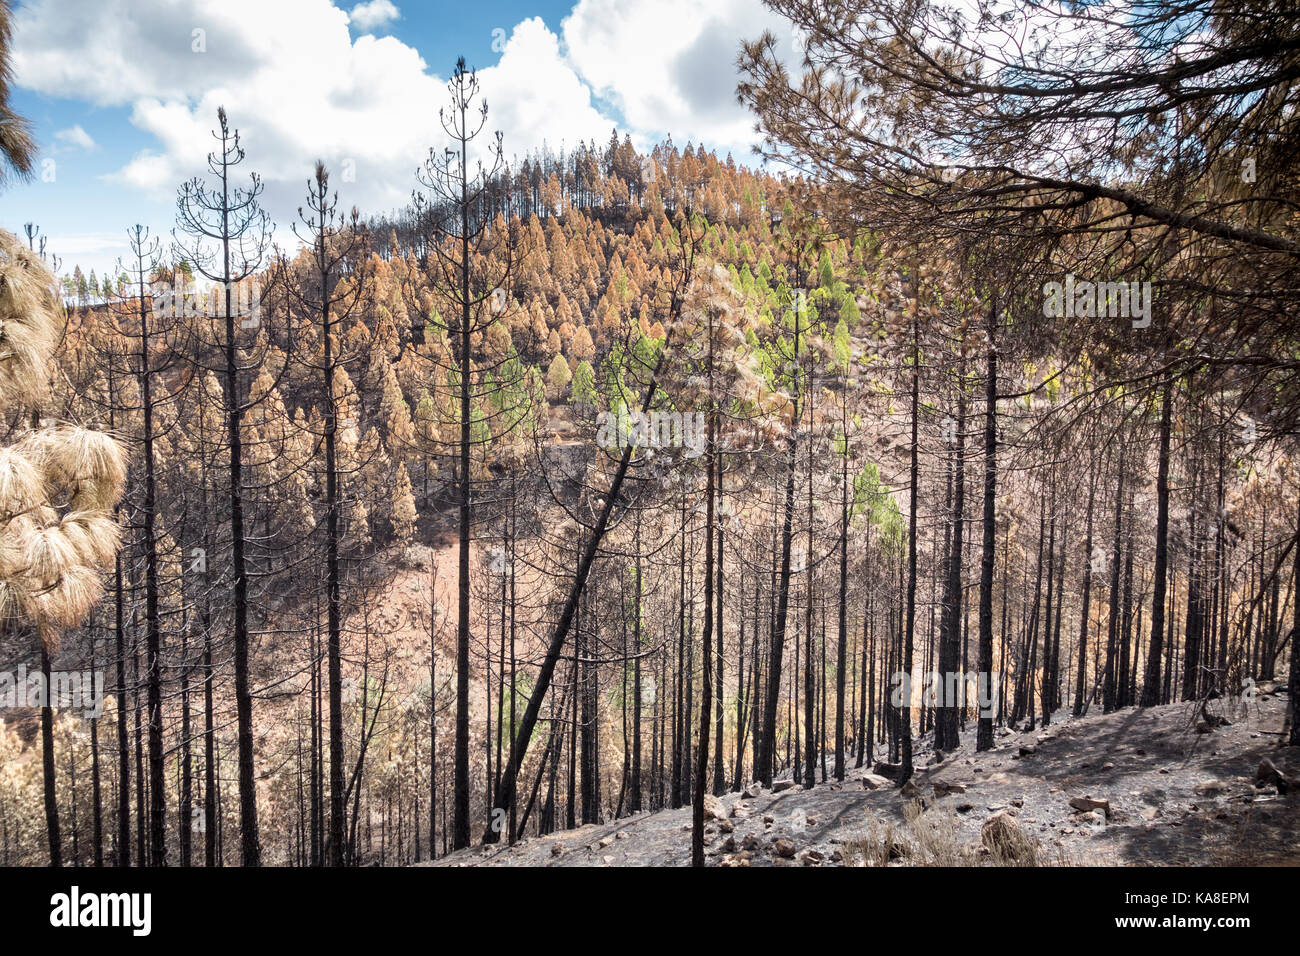 Gran Canaria, Canary Islands, Spain, 25th September, 2017. Mountain roads reopen 5 days after huge forest fire raged through 2,800 hectares of Pine forests. One 60 year old woman died in the fire as she tried to round up livestock near her mountain small holding. Hundreds of people hand to be evacuated from mountain villages. Credit: ALAN DAWSON/Alamy Live News Stock Photo